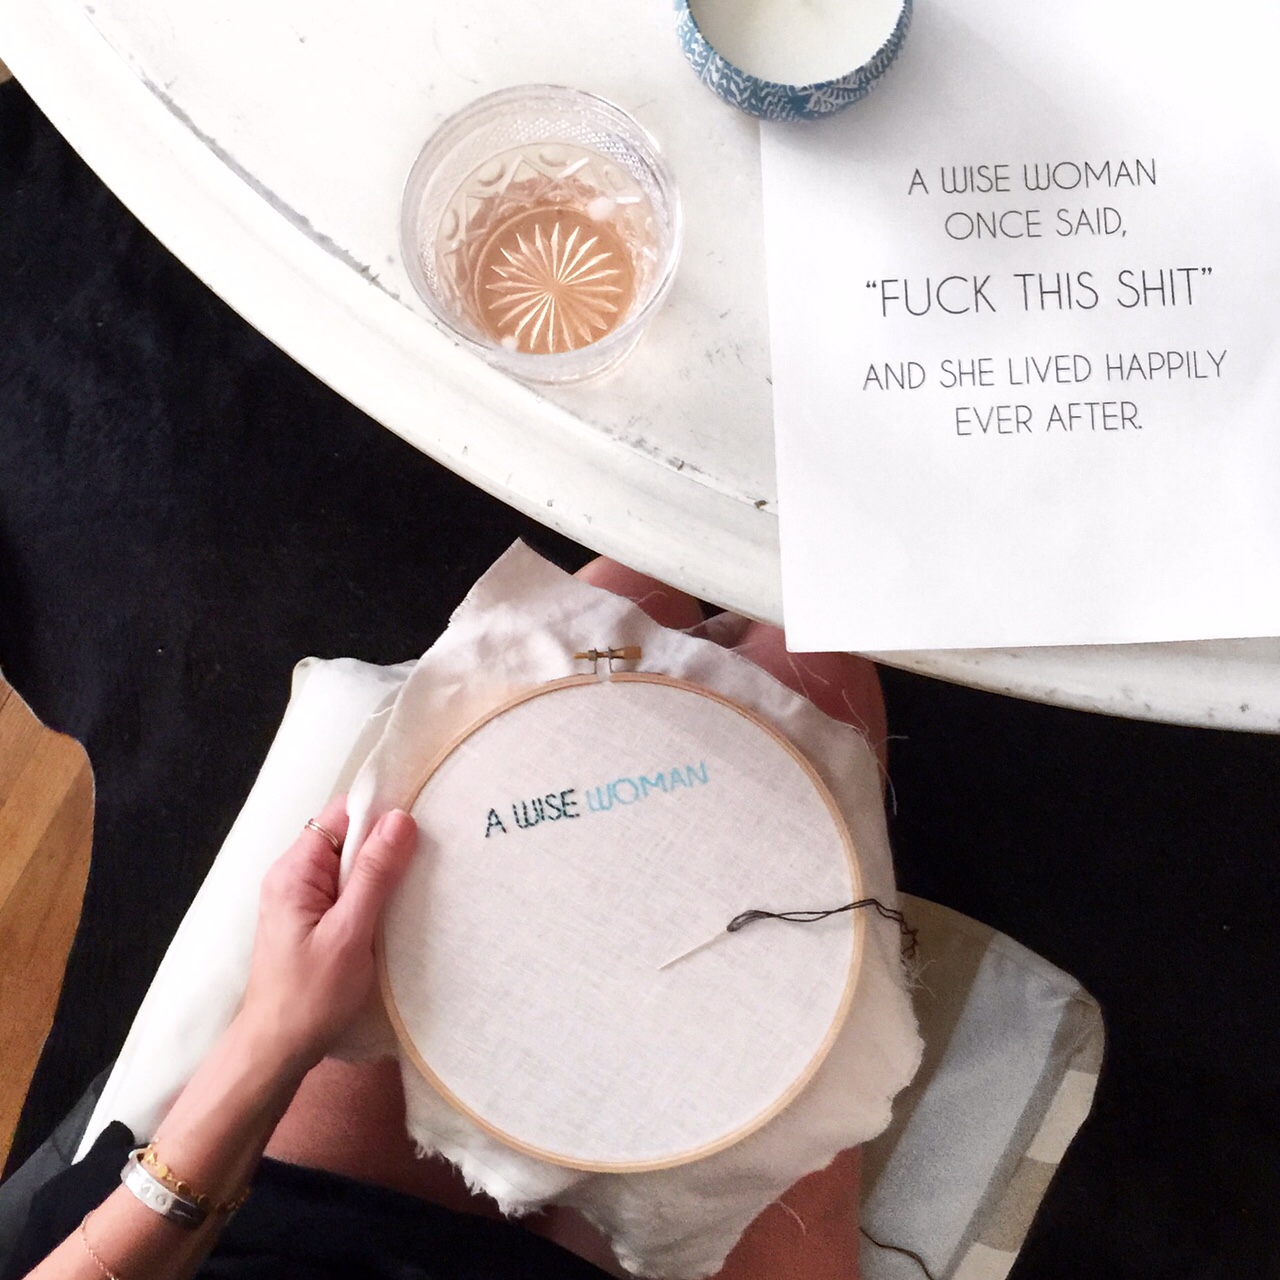 wise woman once said fuck this shit and lived happily ever after embroidery